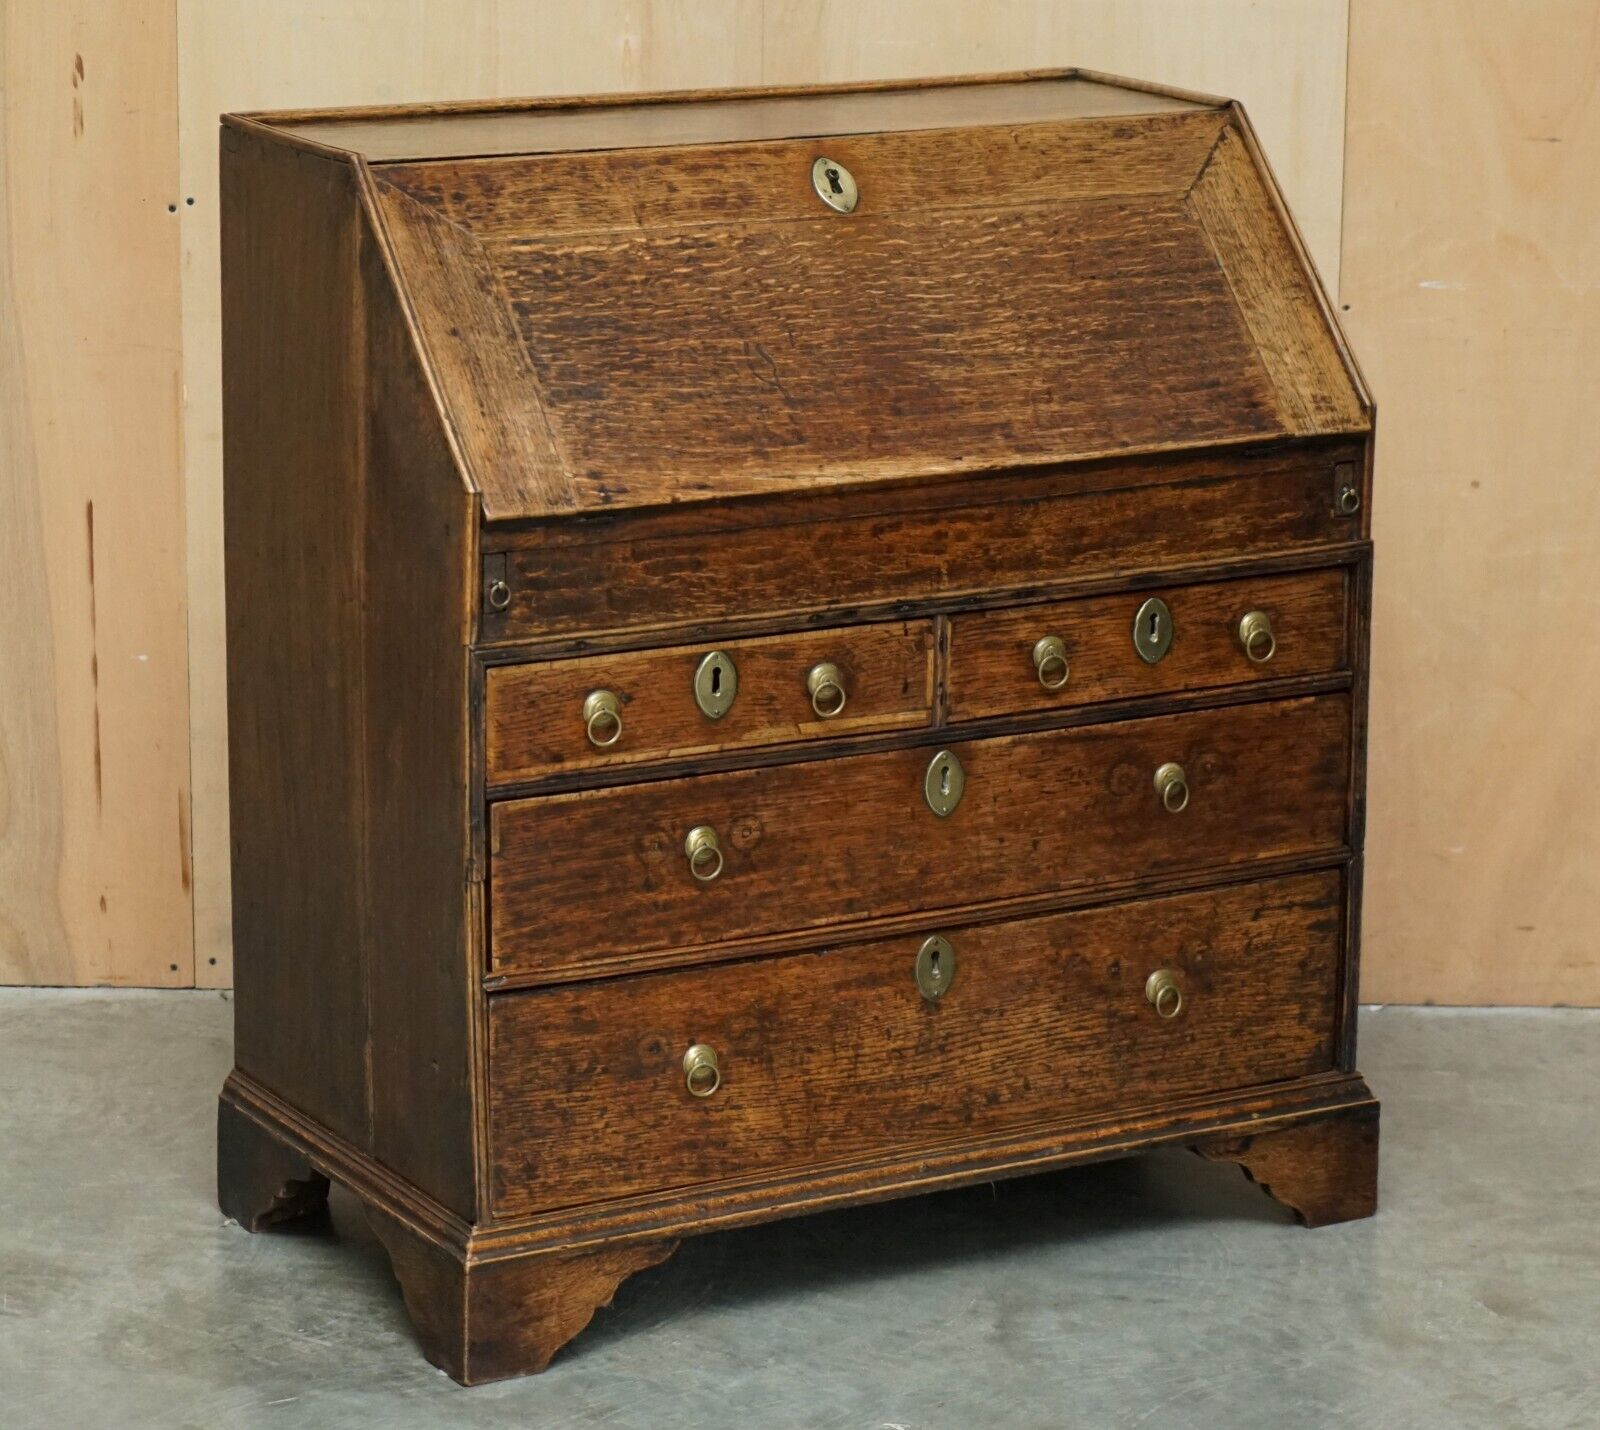 EXQUISITE EARLY GEORGIAN CIRCA 1760 WRITING BUREAU DESK WITH GREEN LEATHER TOP